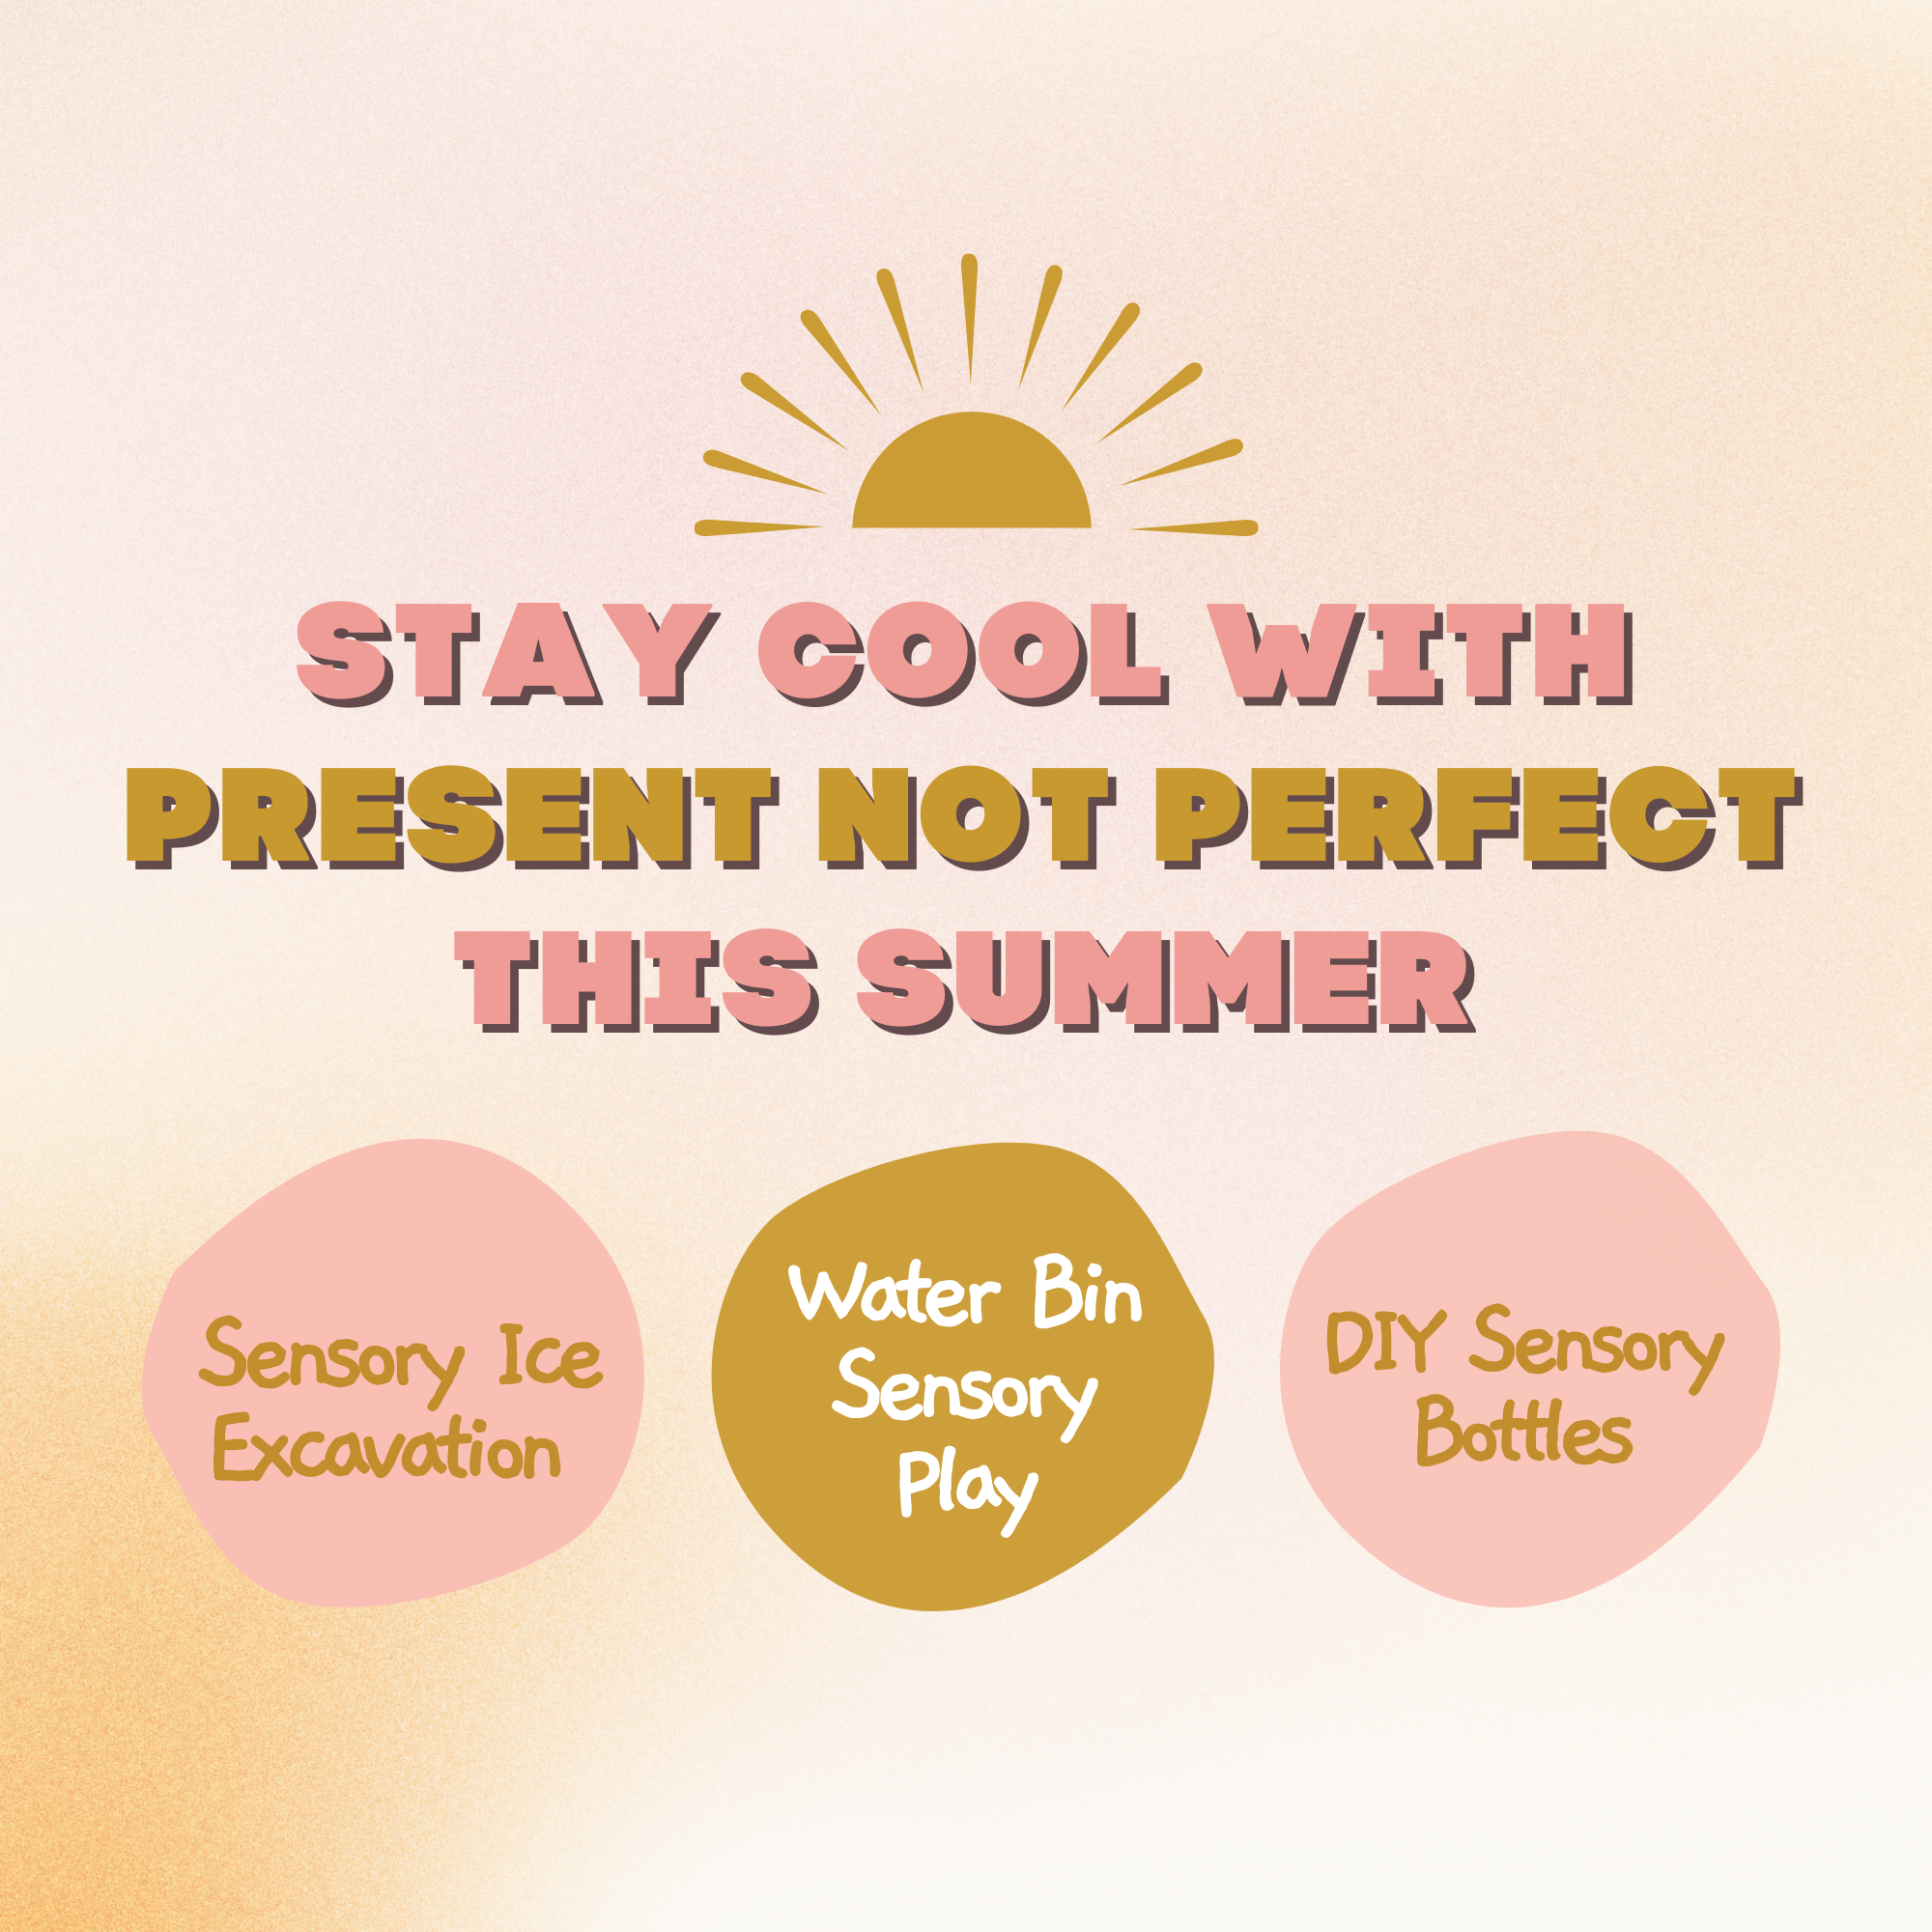 Stay Cool with Present Not Perfect Sensory Kits this Summer!